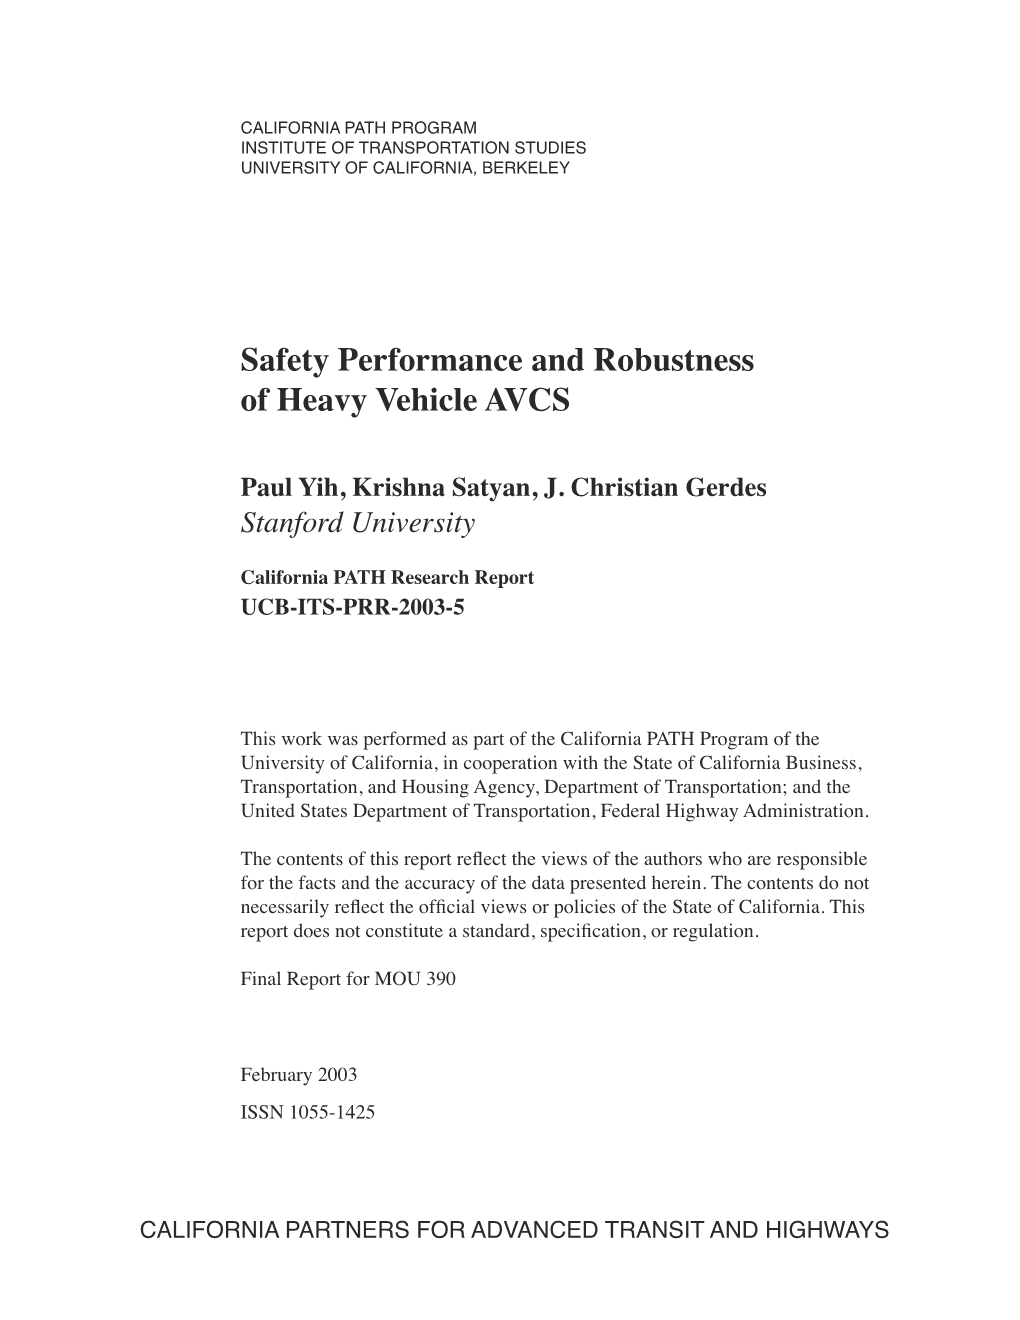 Safety Performance and Robustness of Heavy Vehicle AVCS